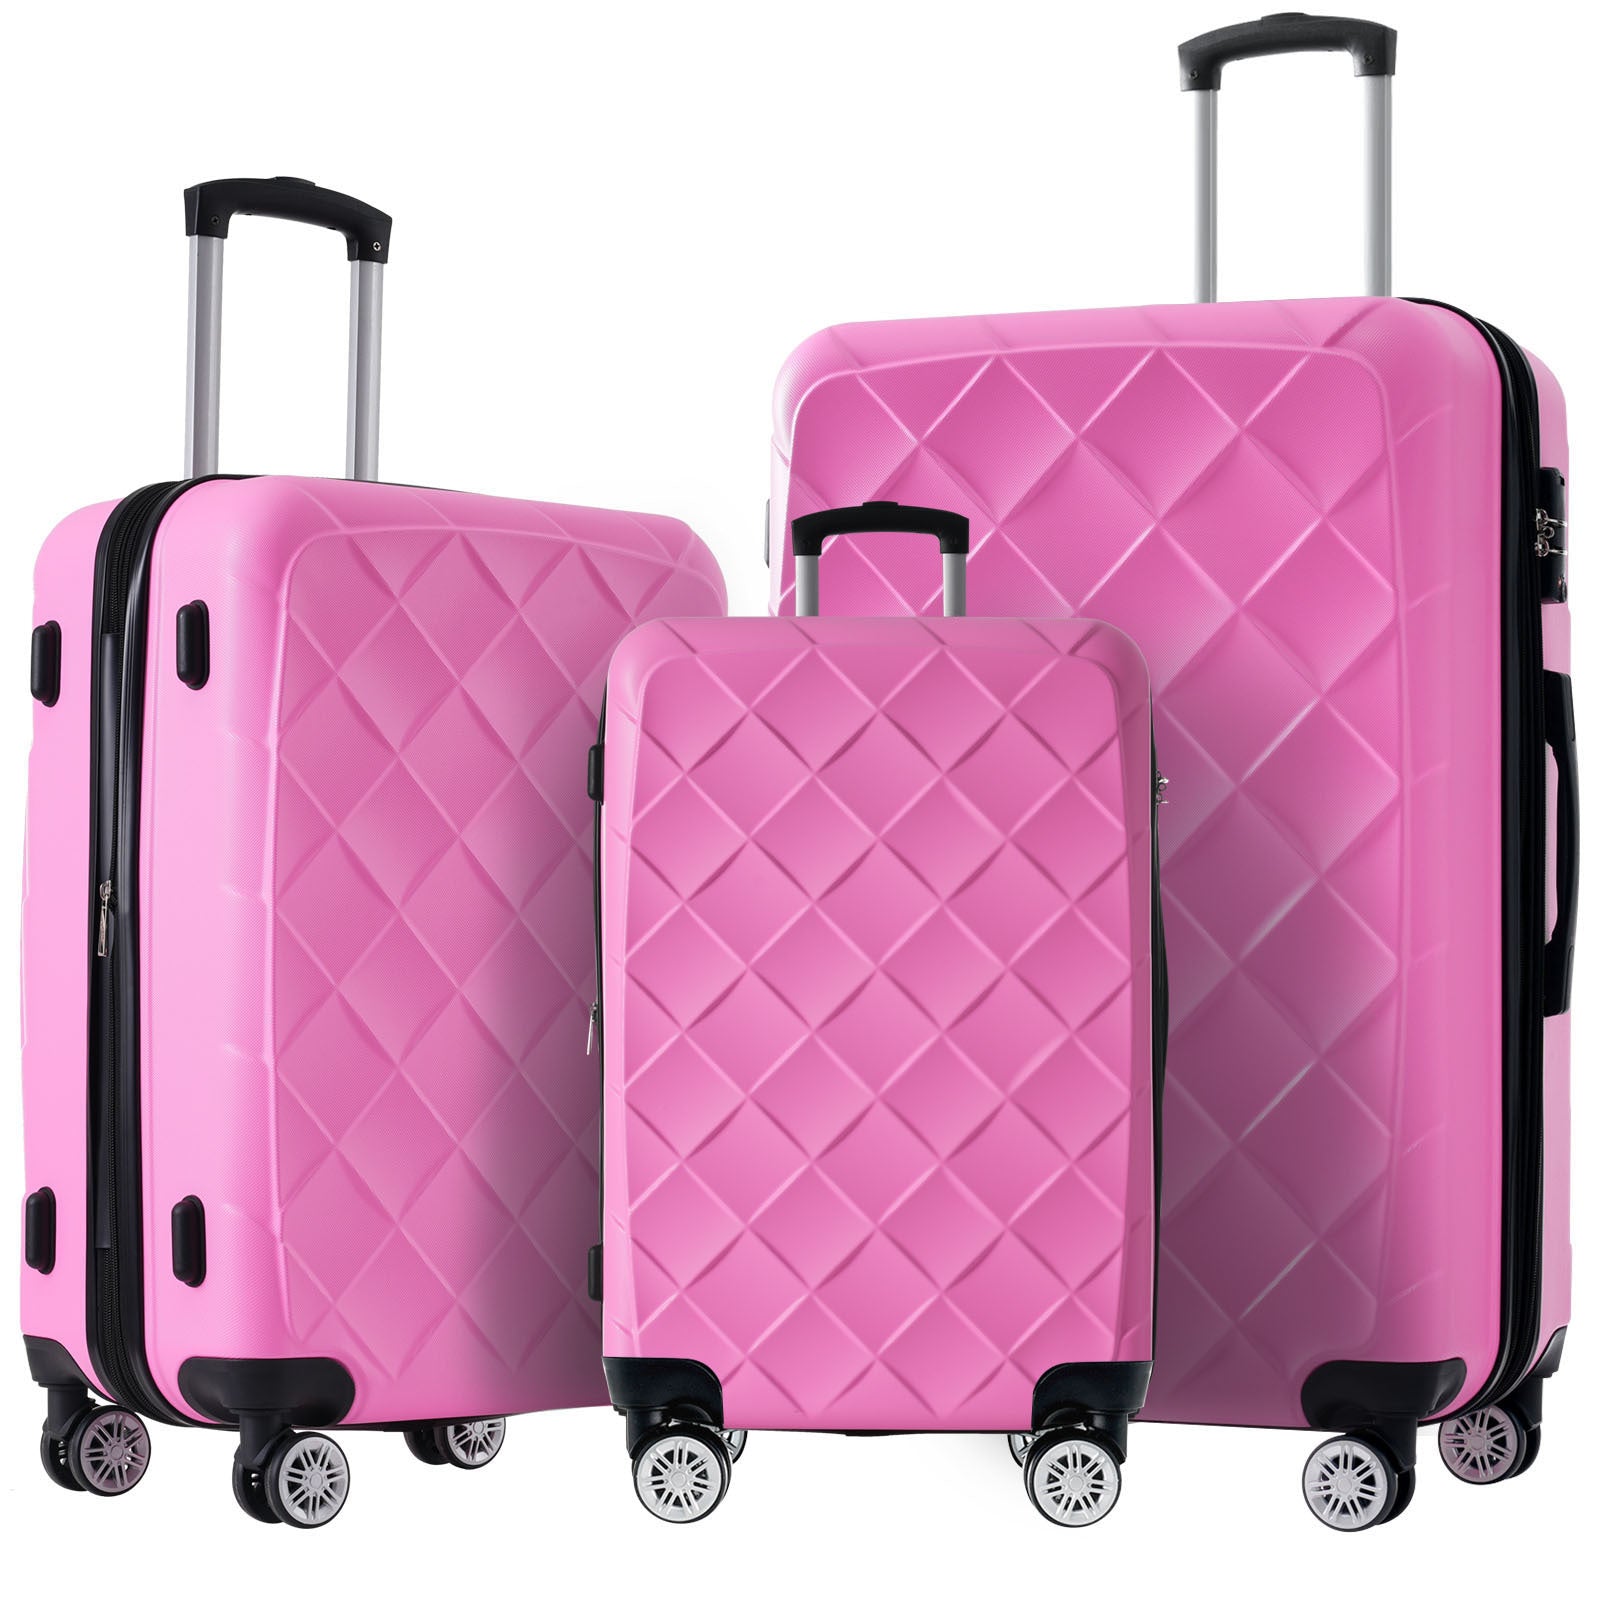 3 Piece Luggage Set Suitcase Set, ABS Hard Shell pink-abs